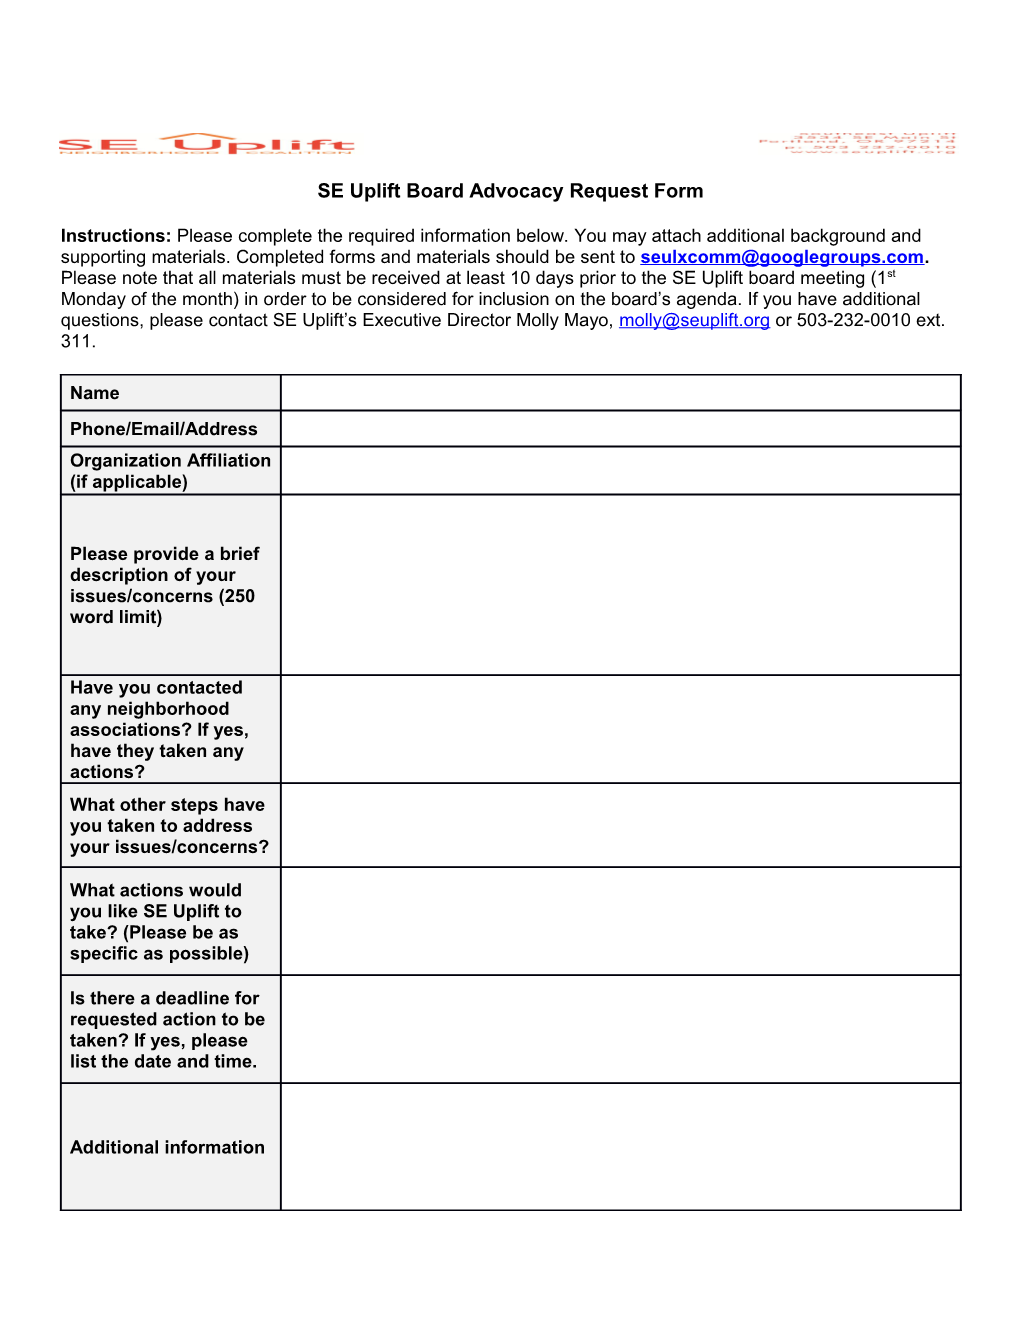 SE Uplift Board Advocacy Request Form